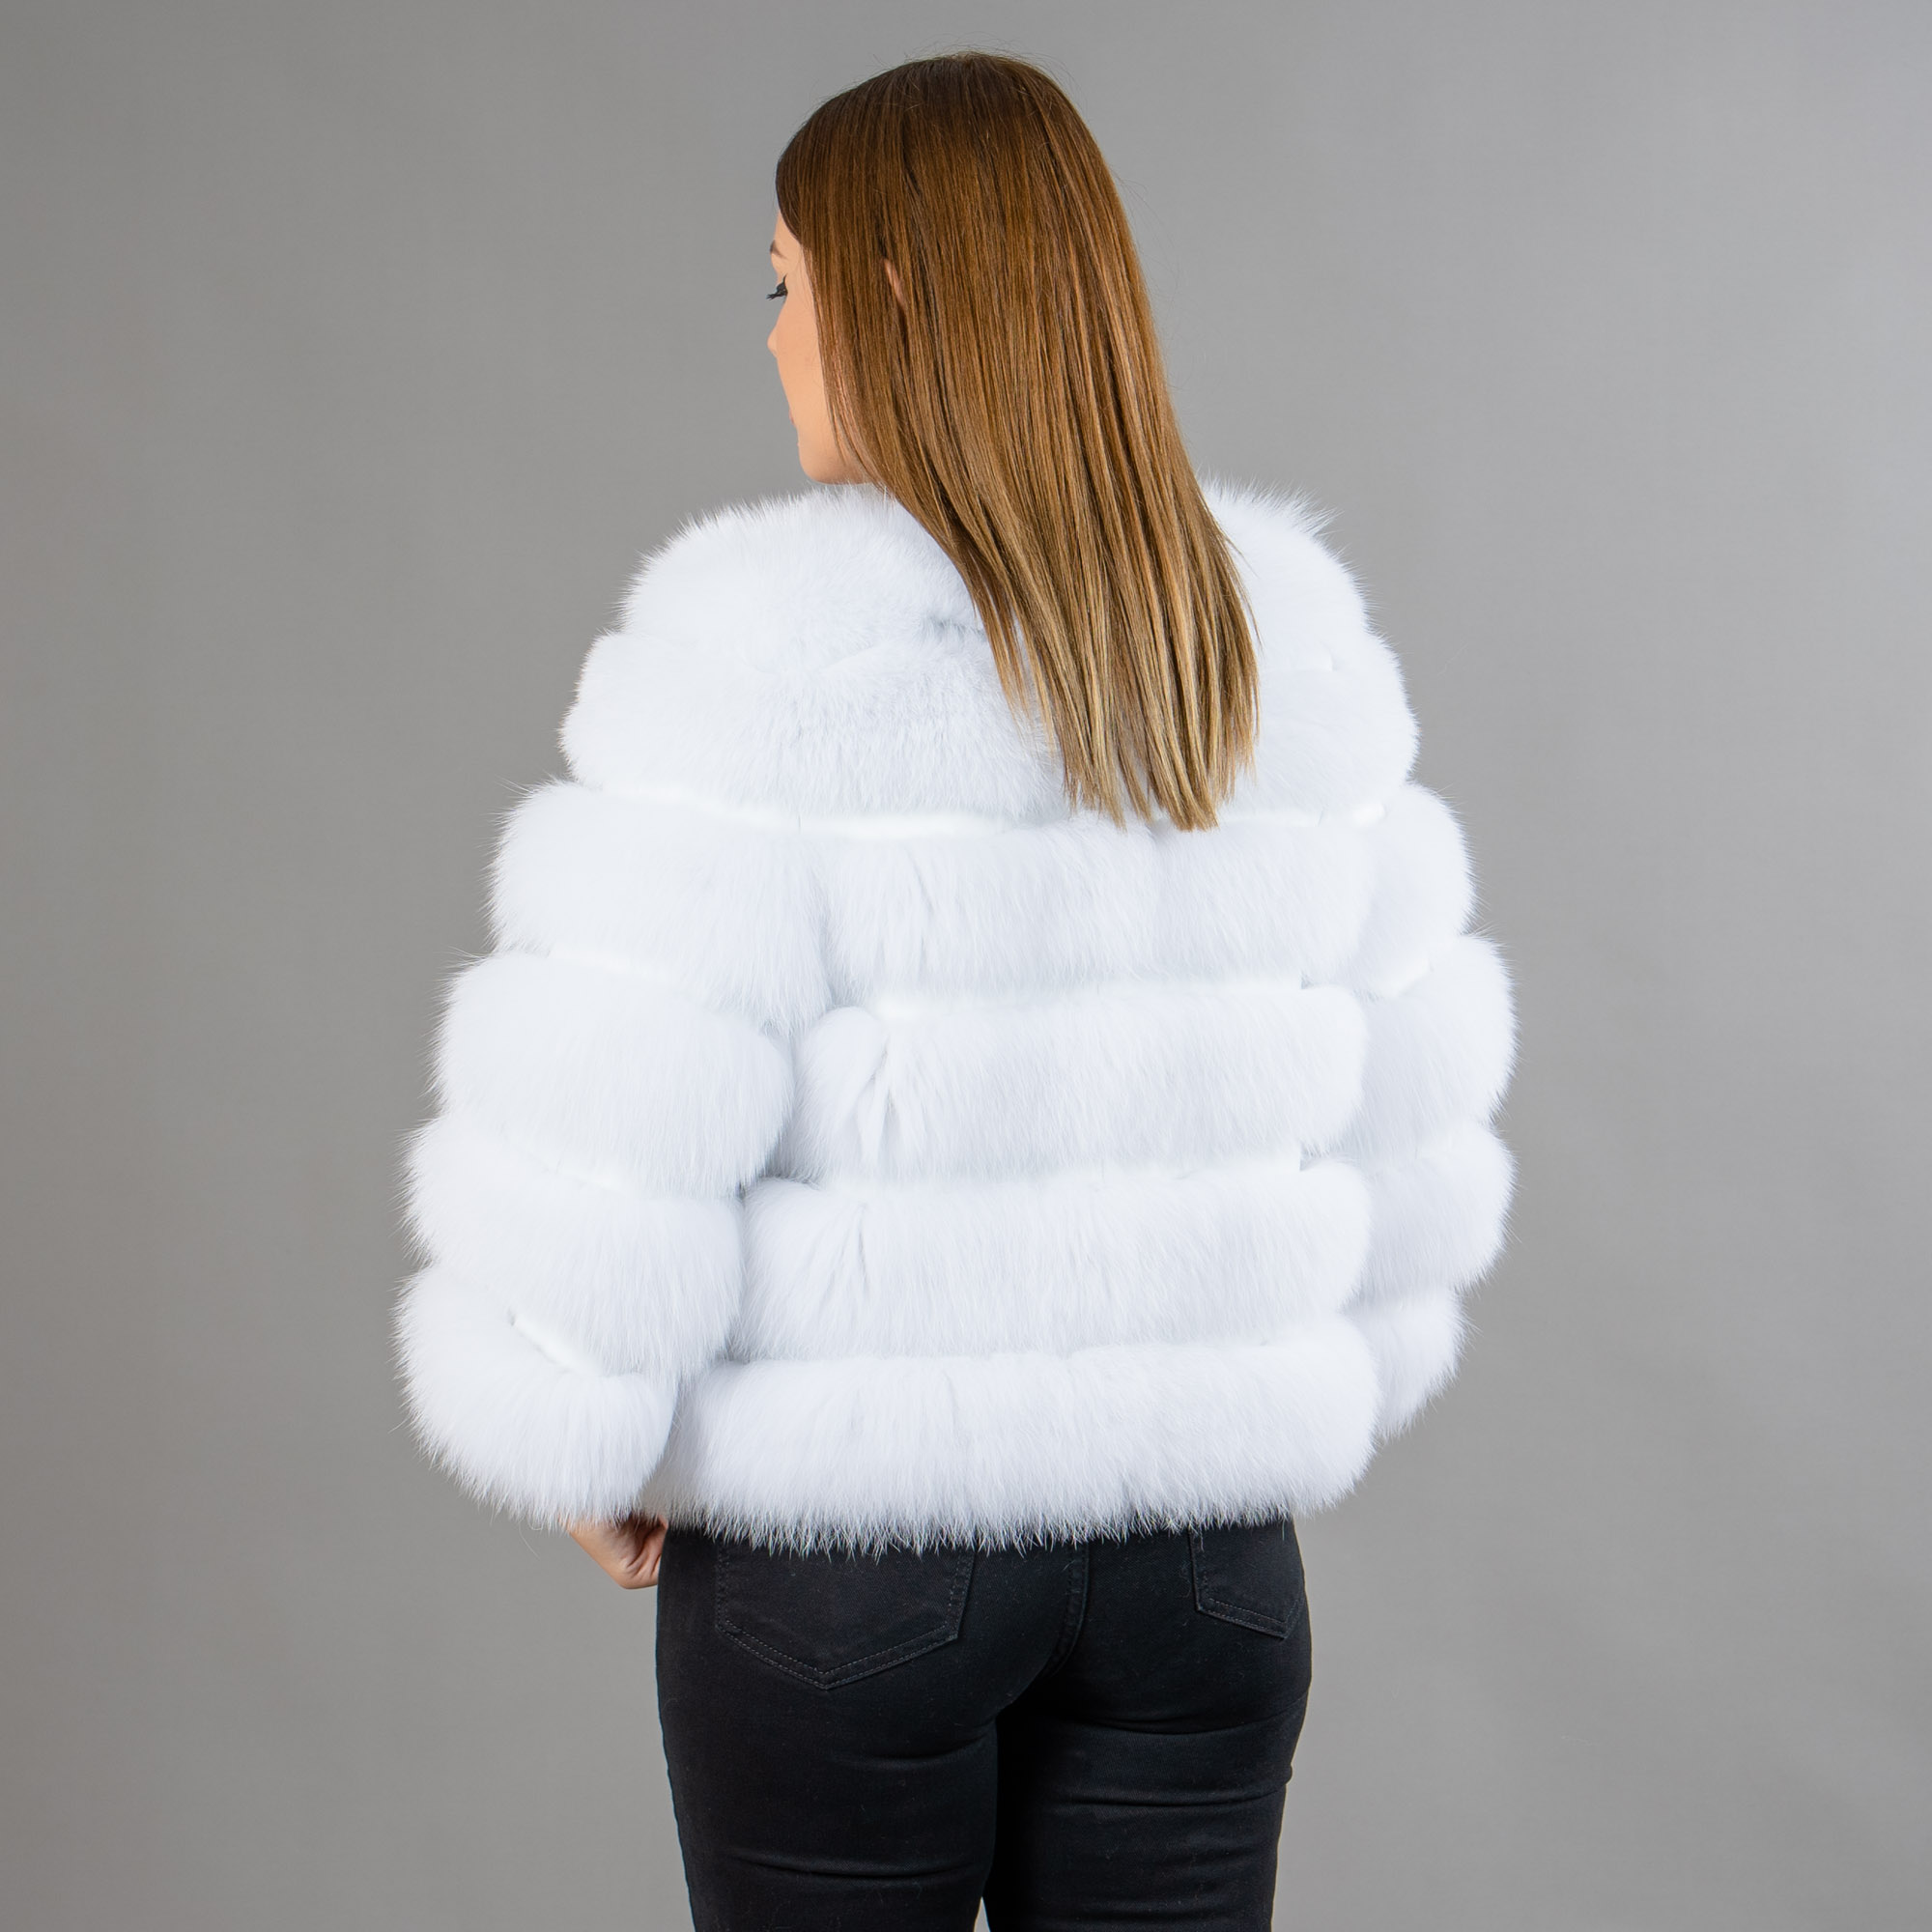 White fox fur jacket with leather details. 